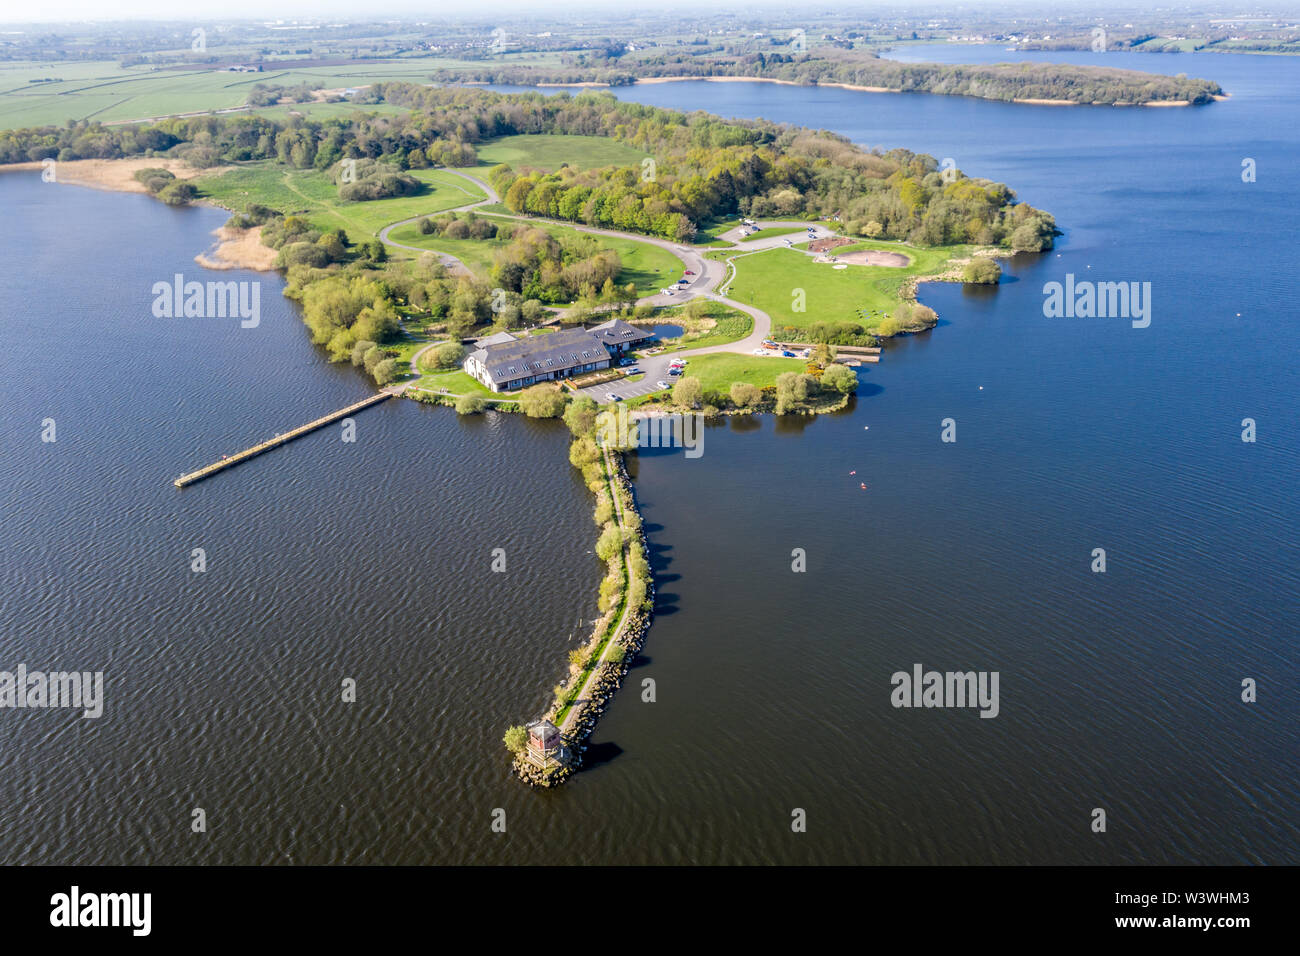 Oxford Island nature reserve and Lough Neagh Stock Photo